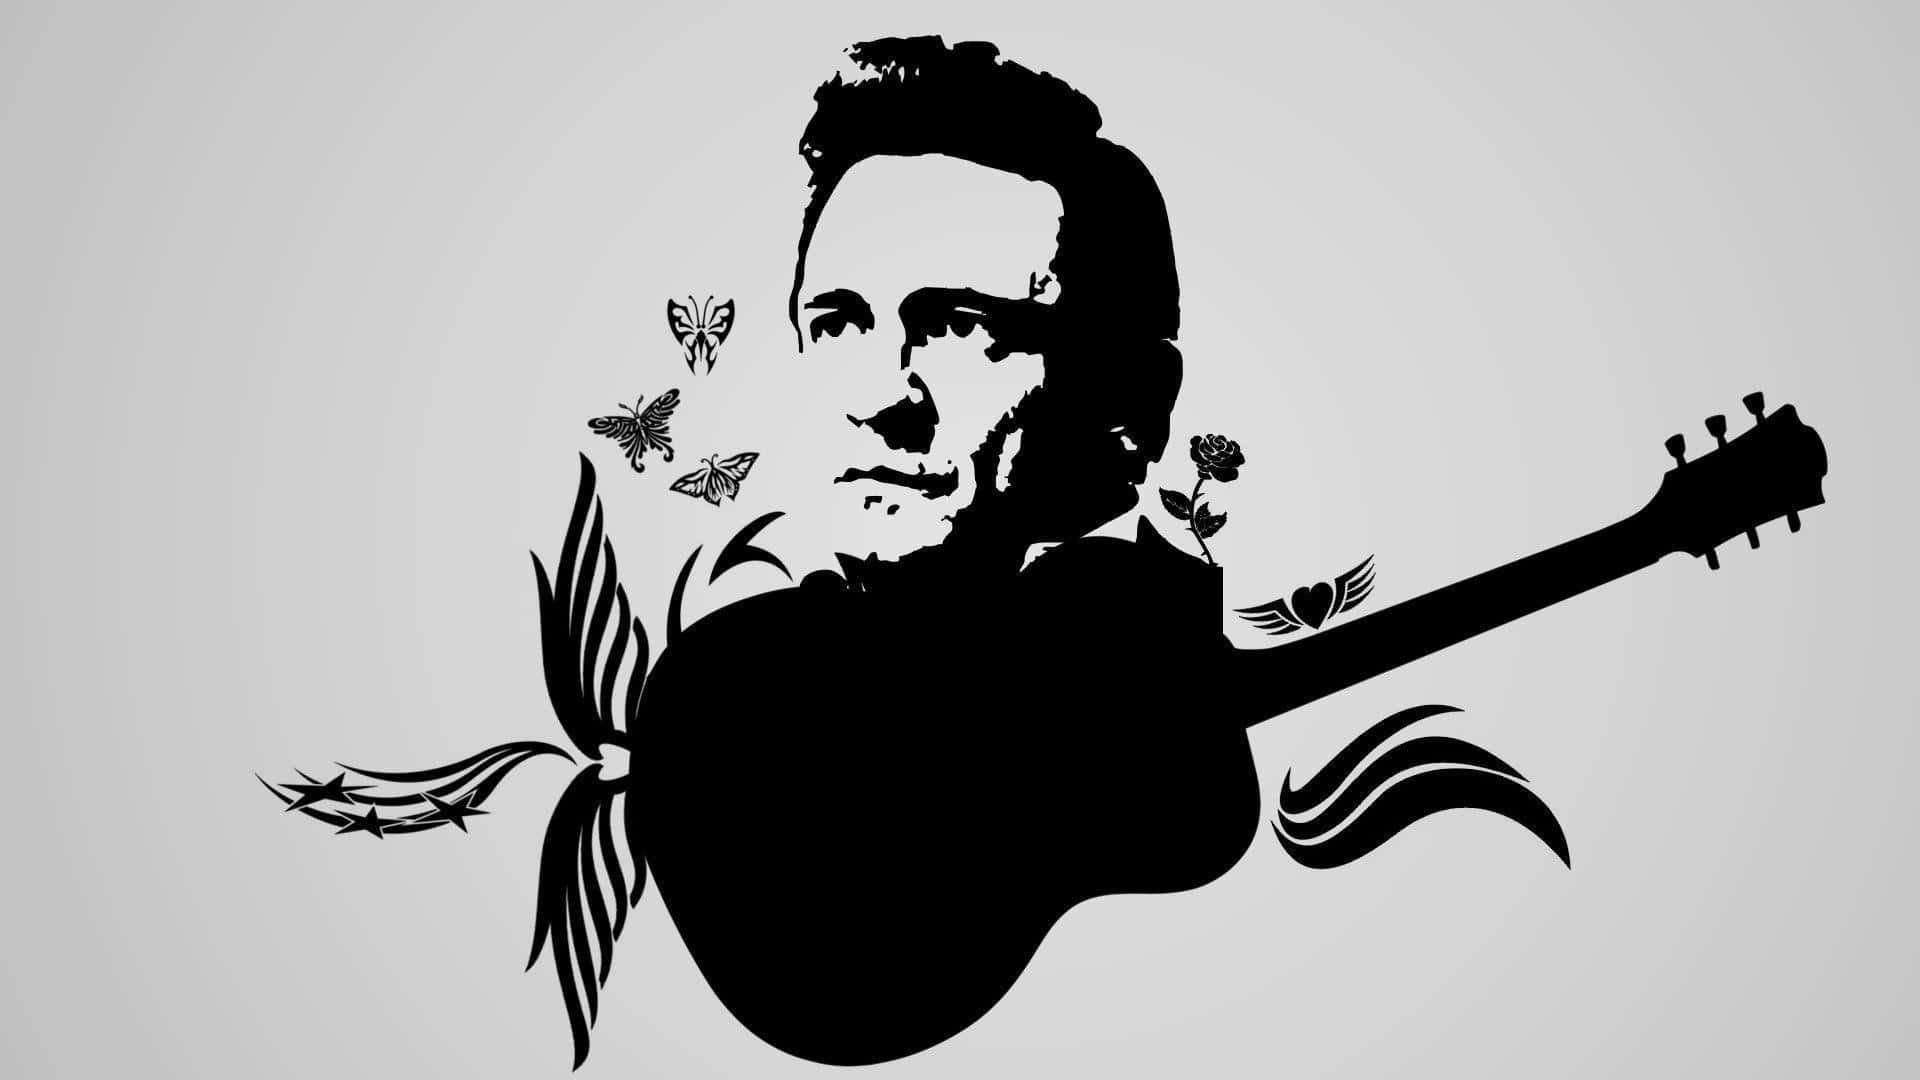 "Johnny Cash - An Icon Of American Music"